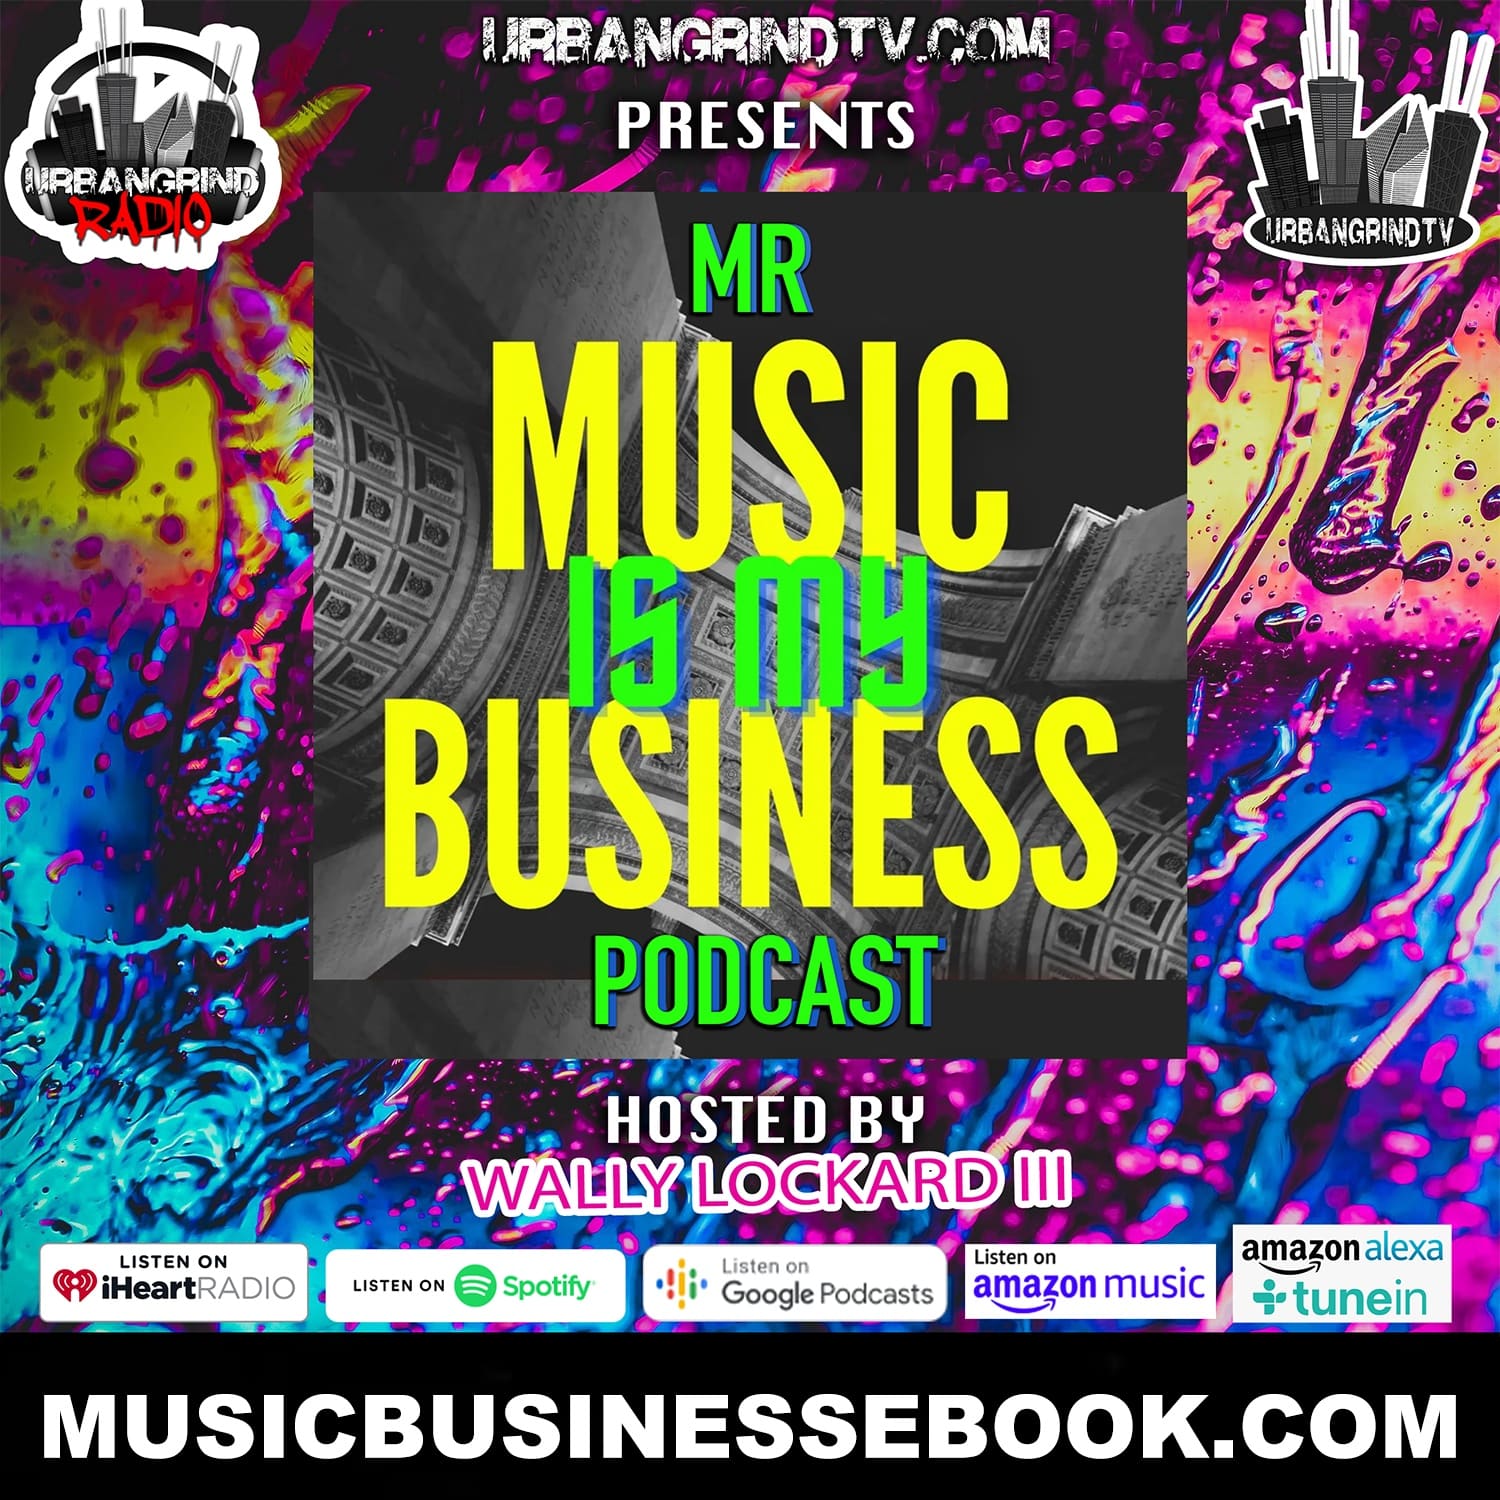 This Week on Urban Grind TV the Premiere of  MR. MUSIC IS MY BUSINESS PODCAST